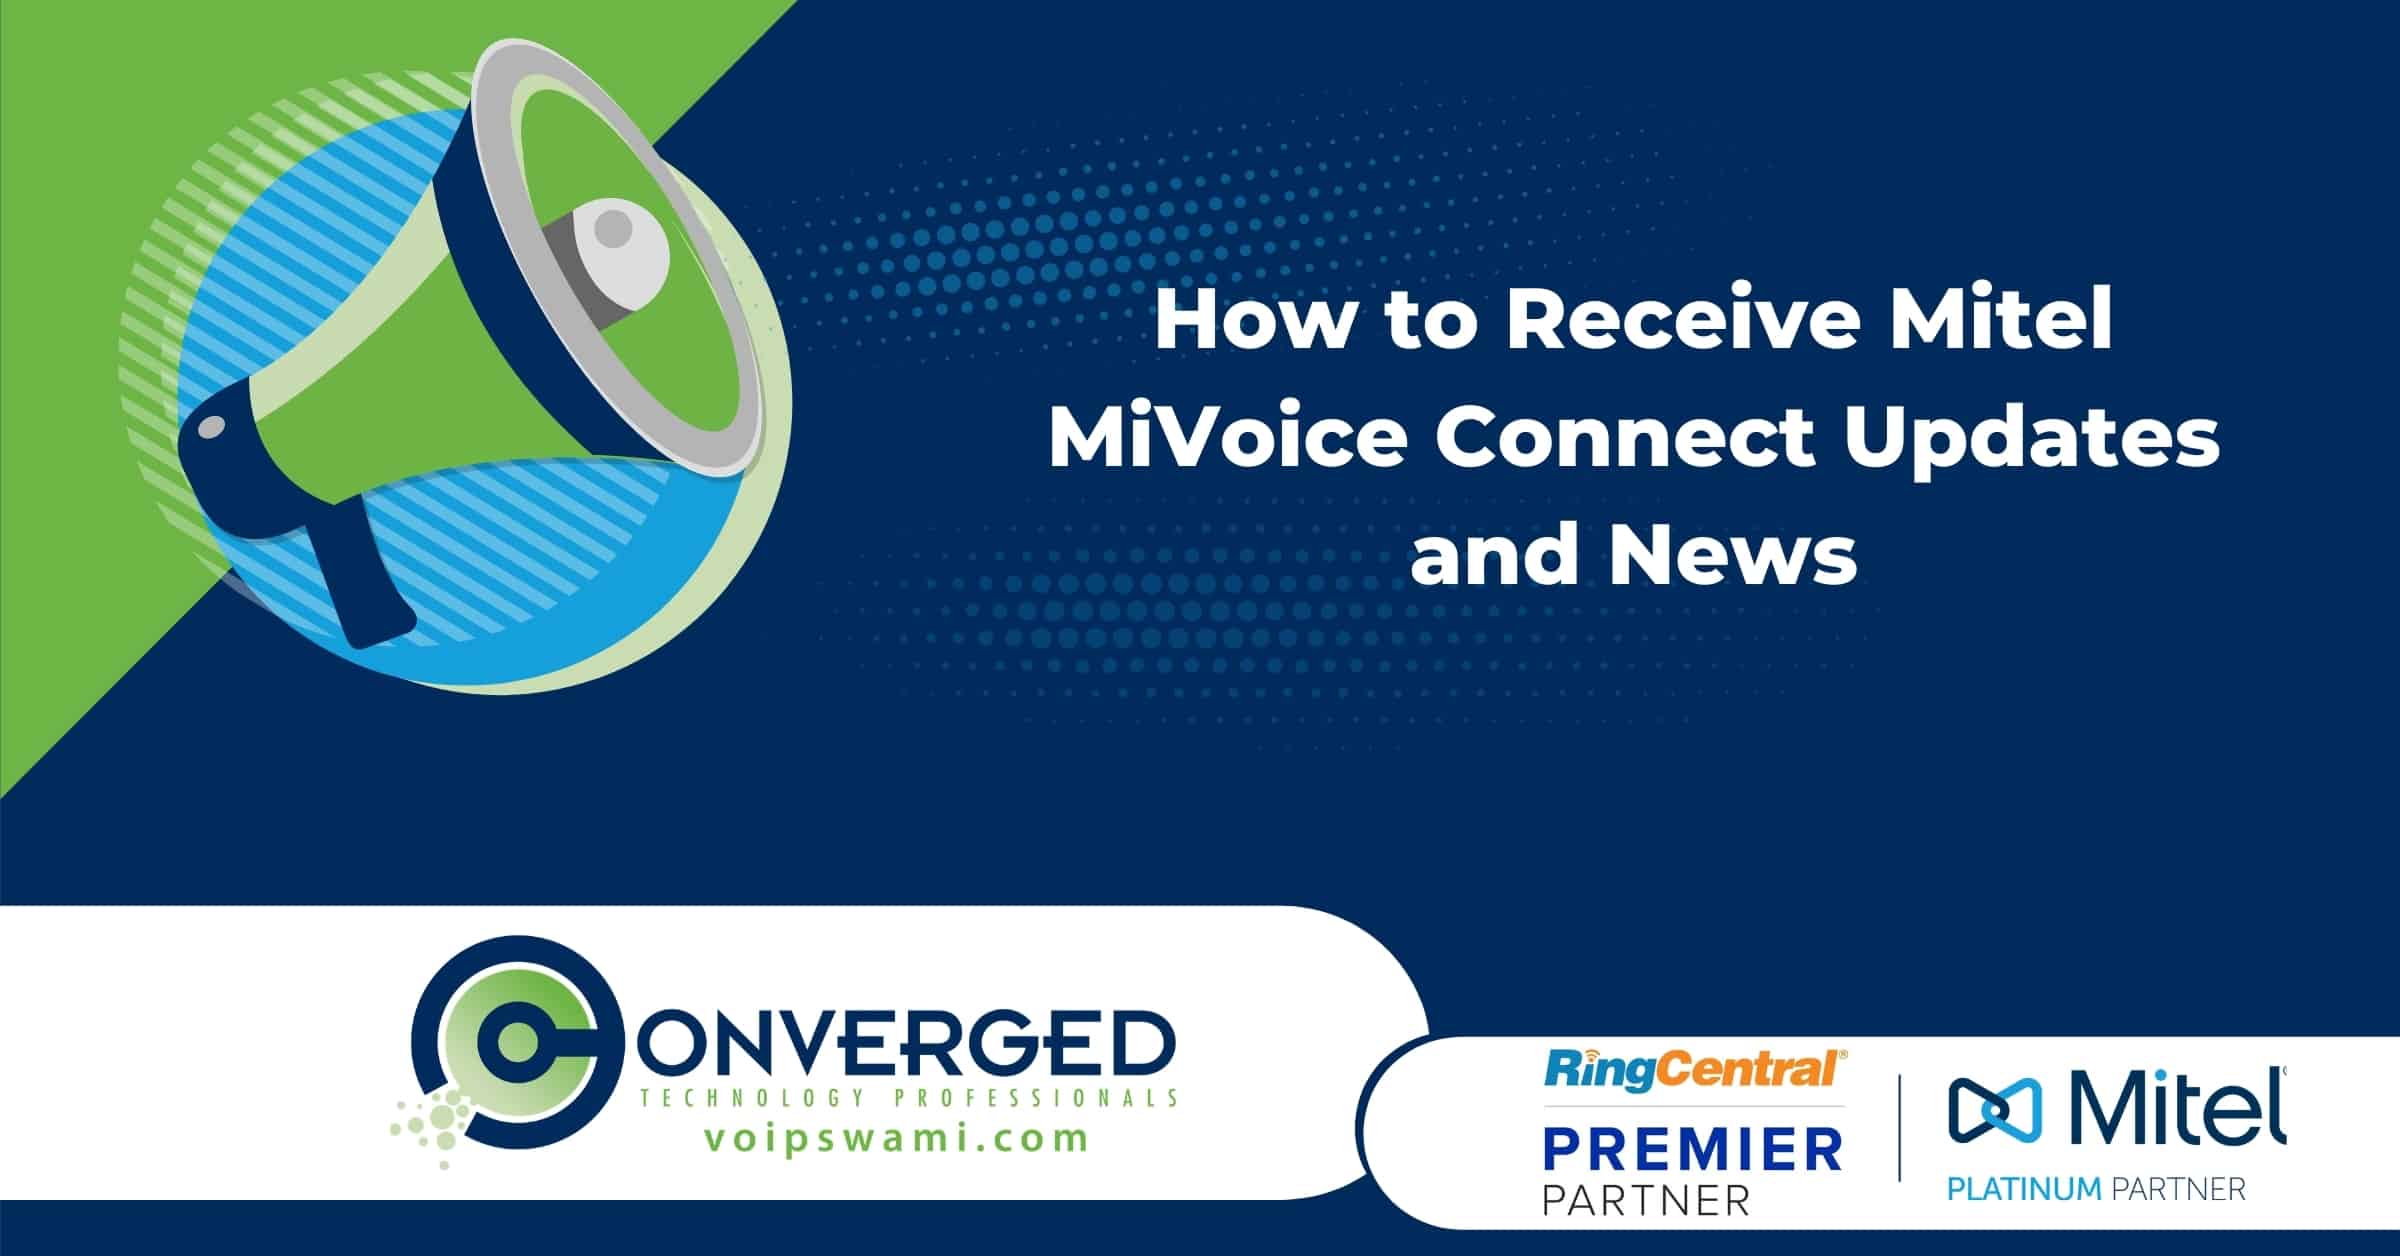 How to Receive Mitel MiVoice Connect Updates and News